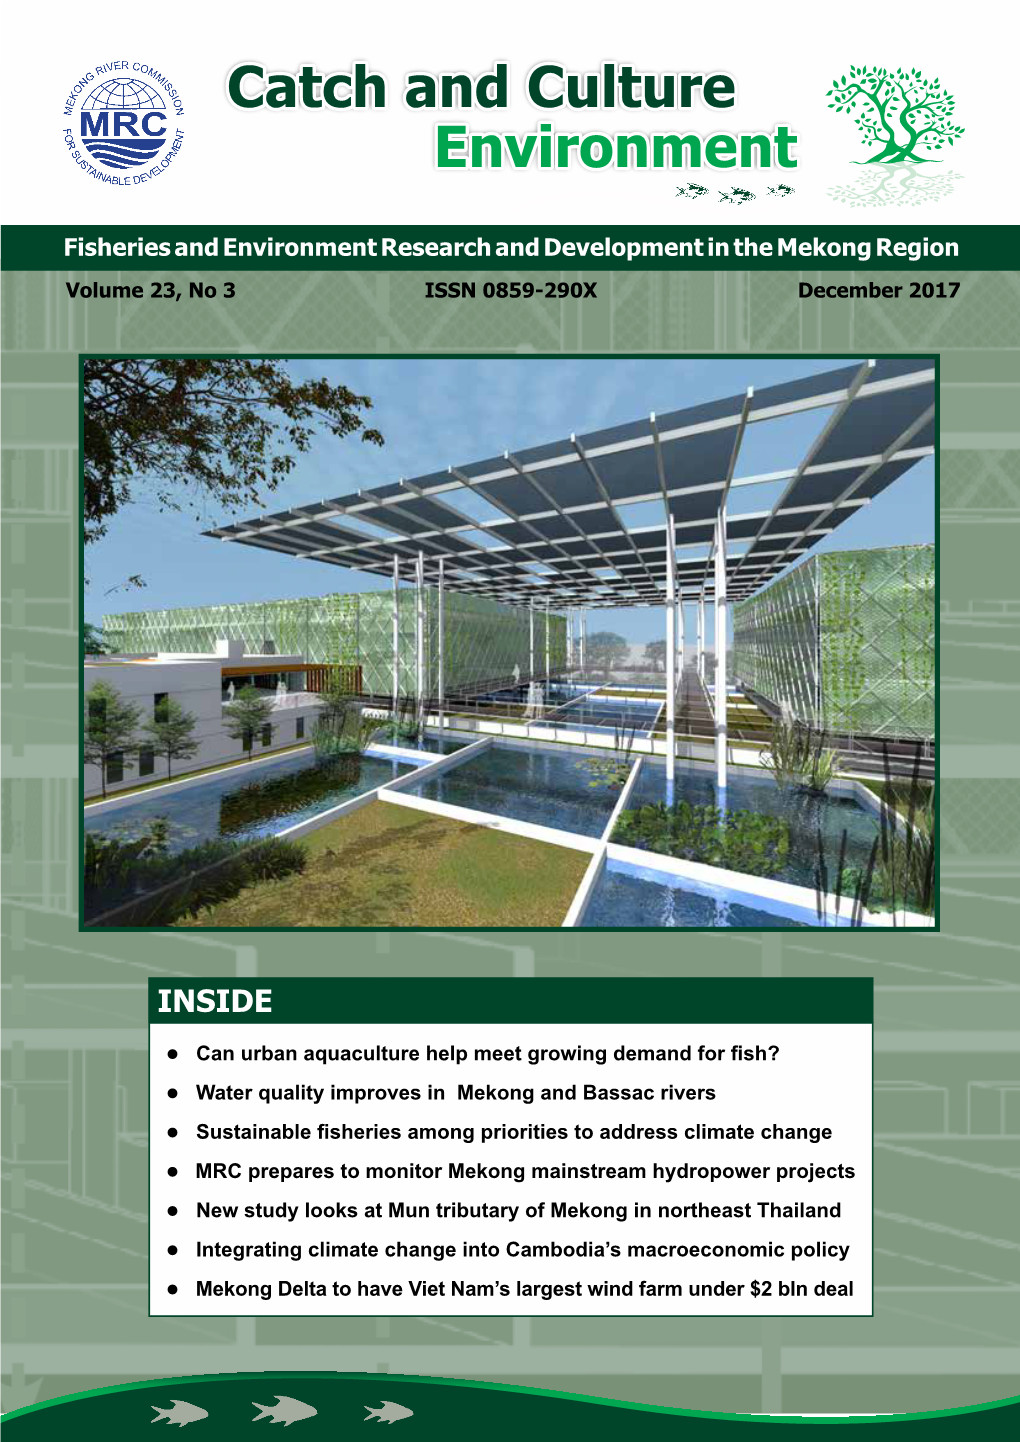 Fisheries and Environment Research and Development in the Mekong Region Volume 23, No 3 ISSN 0859-290X December 2017